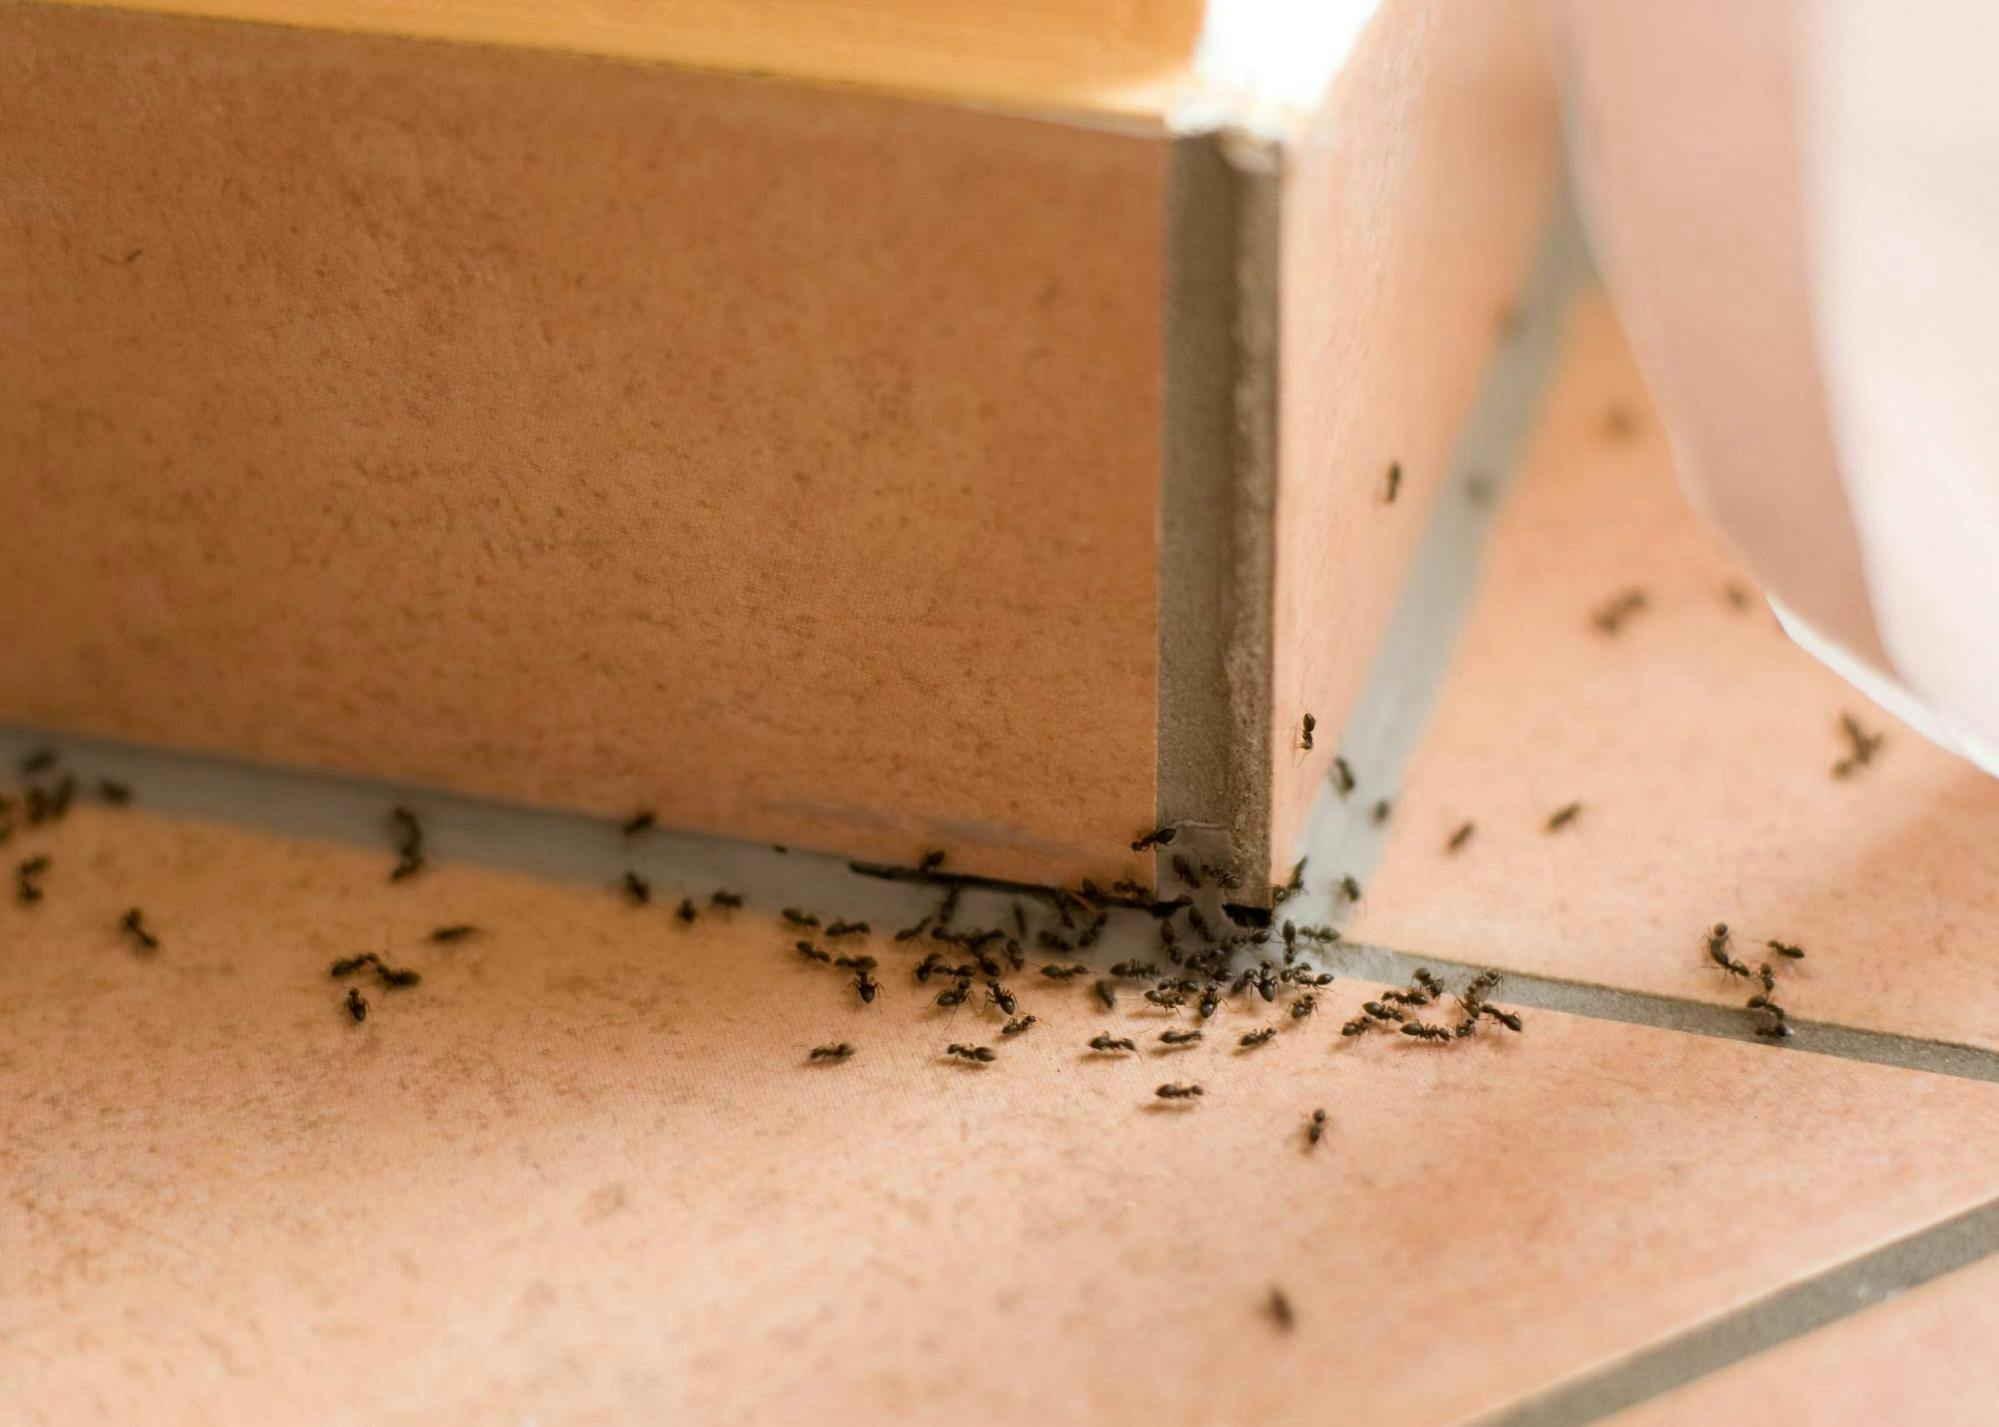 get rid of the ants